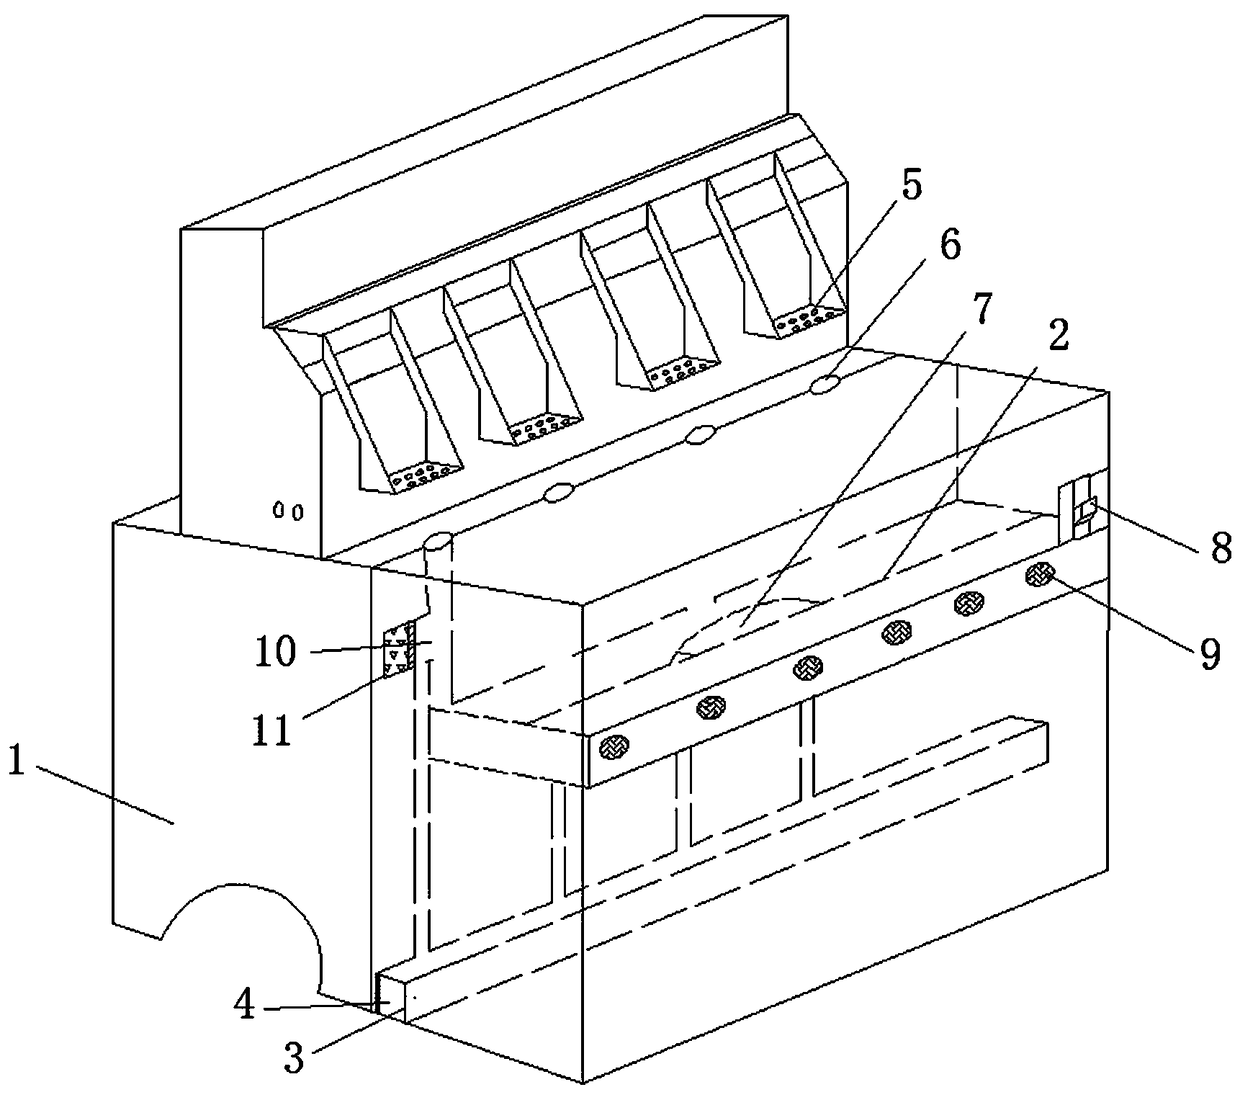 Dust collection and removal device of textile machine